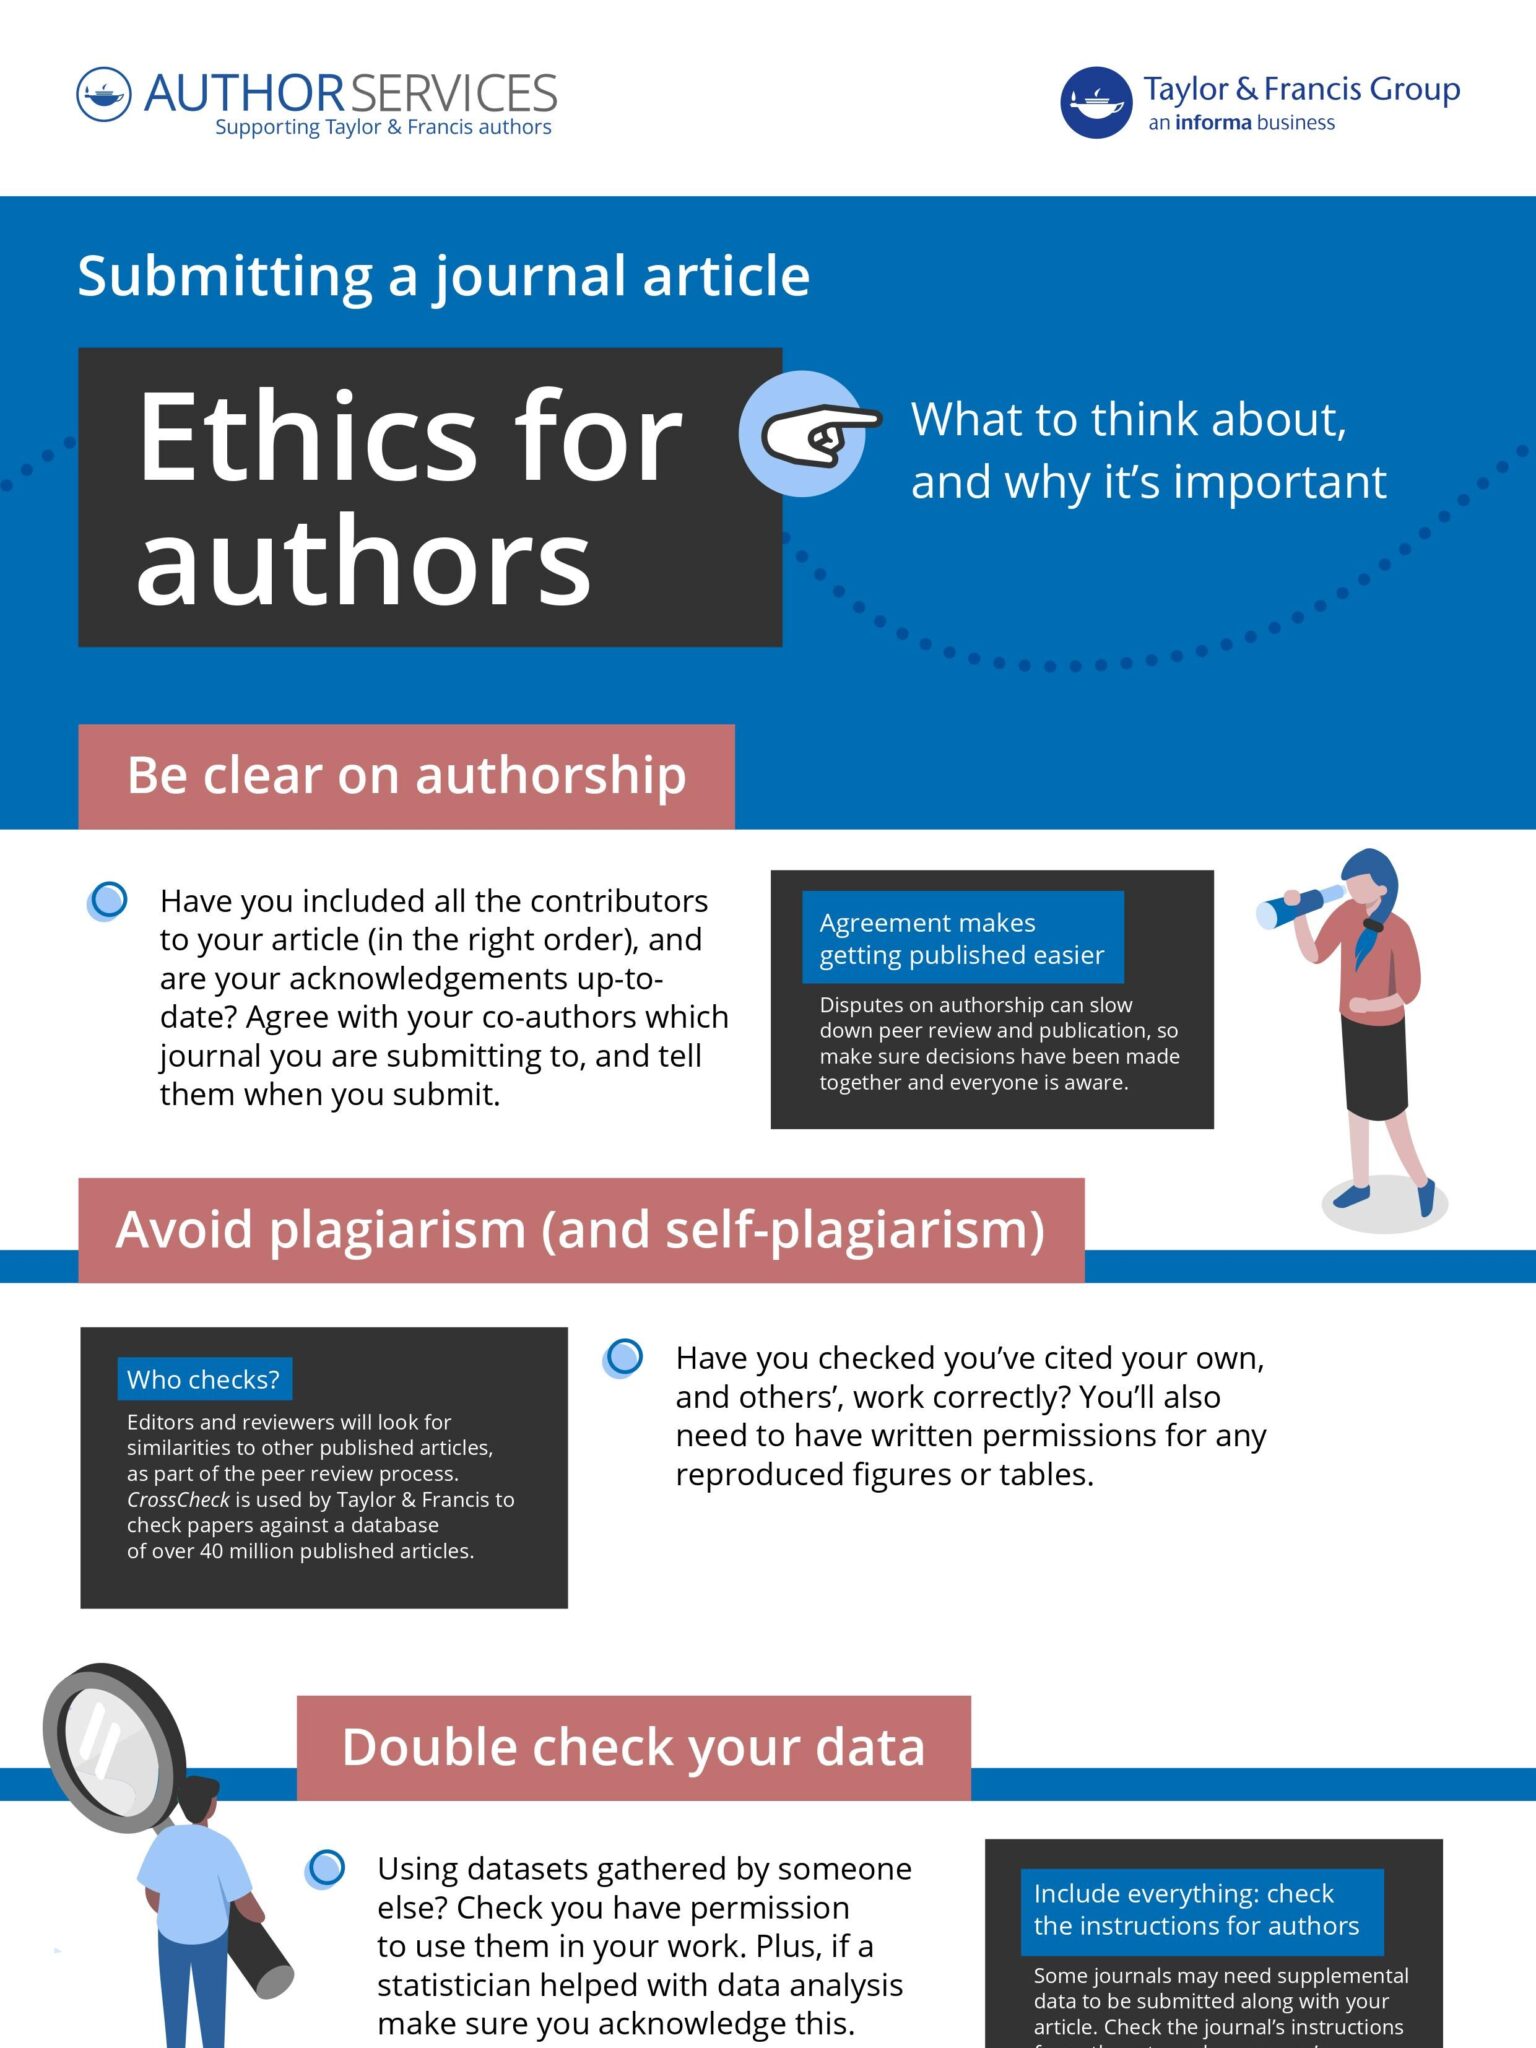 Infographic with information about ethics for authors of journal articles.